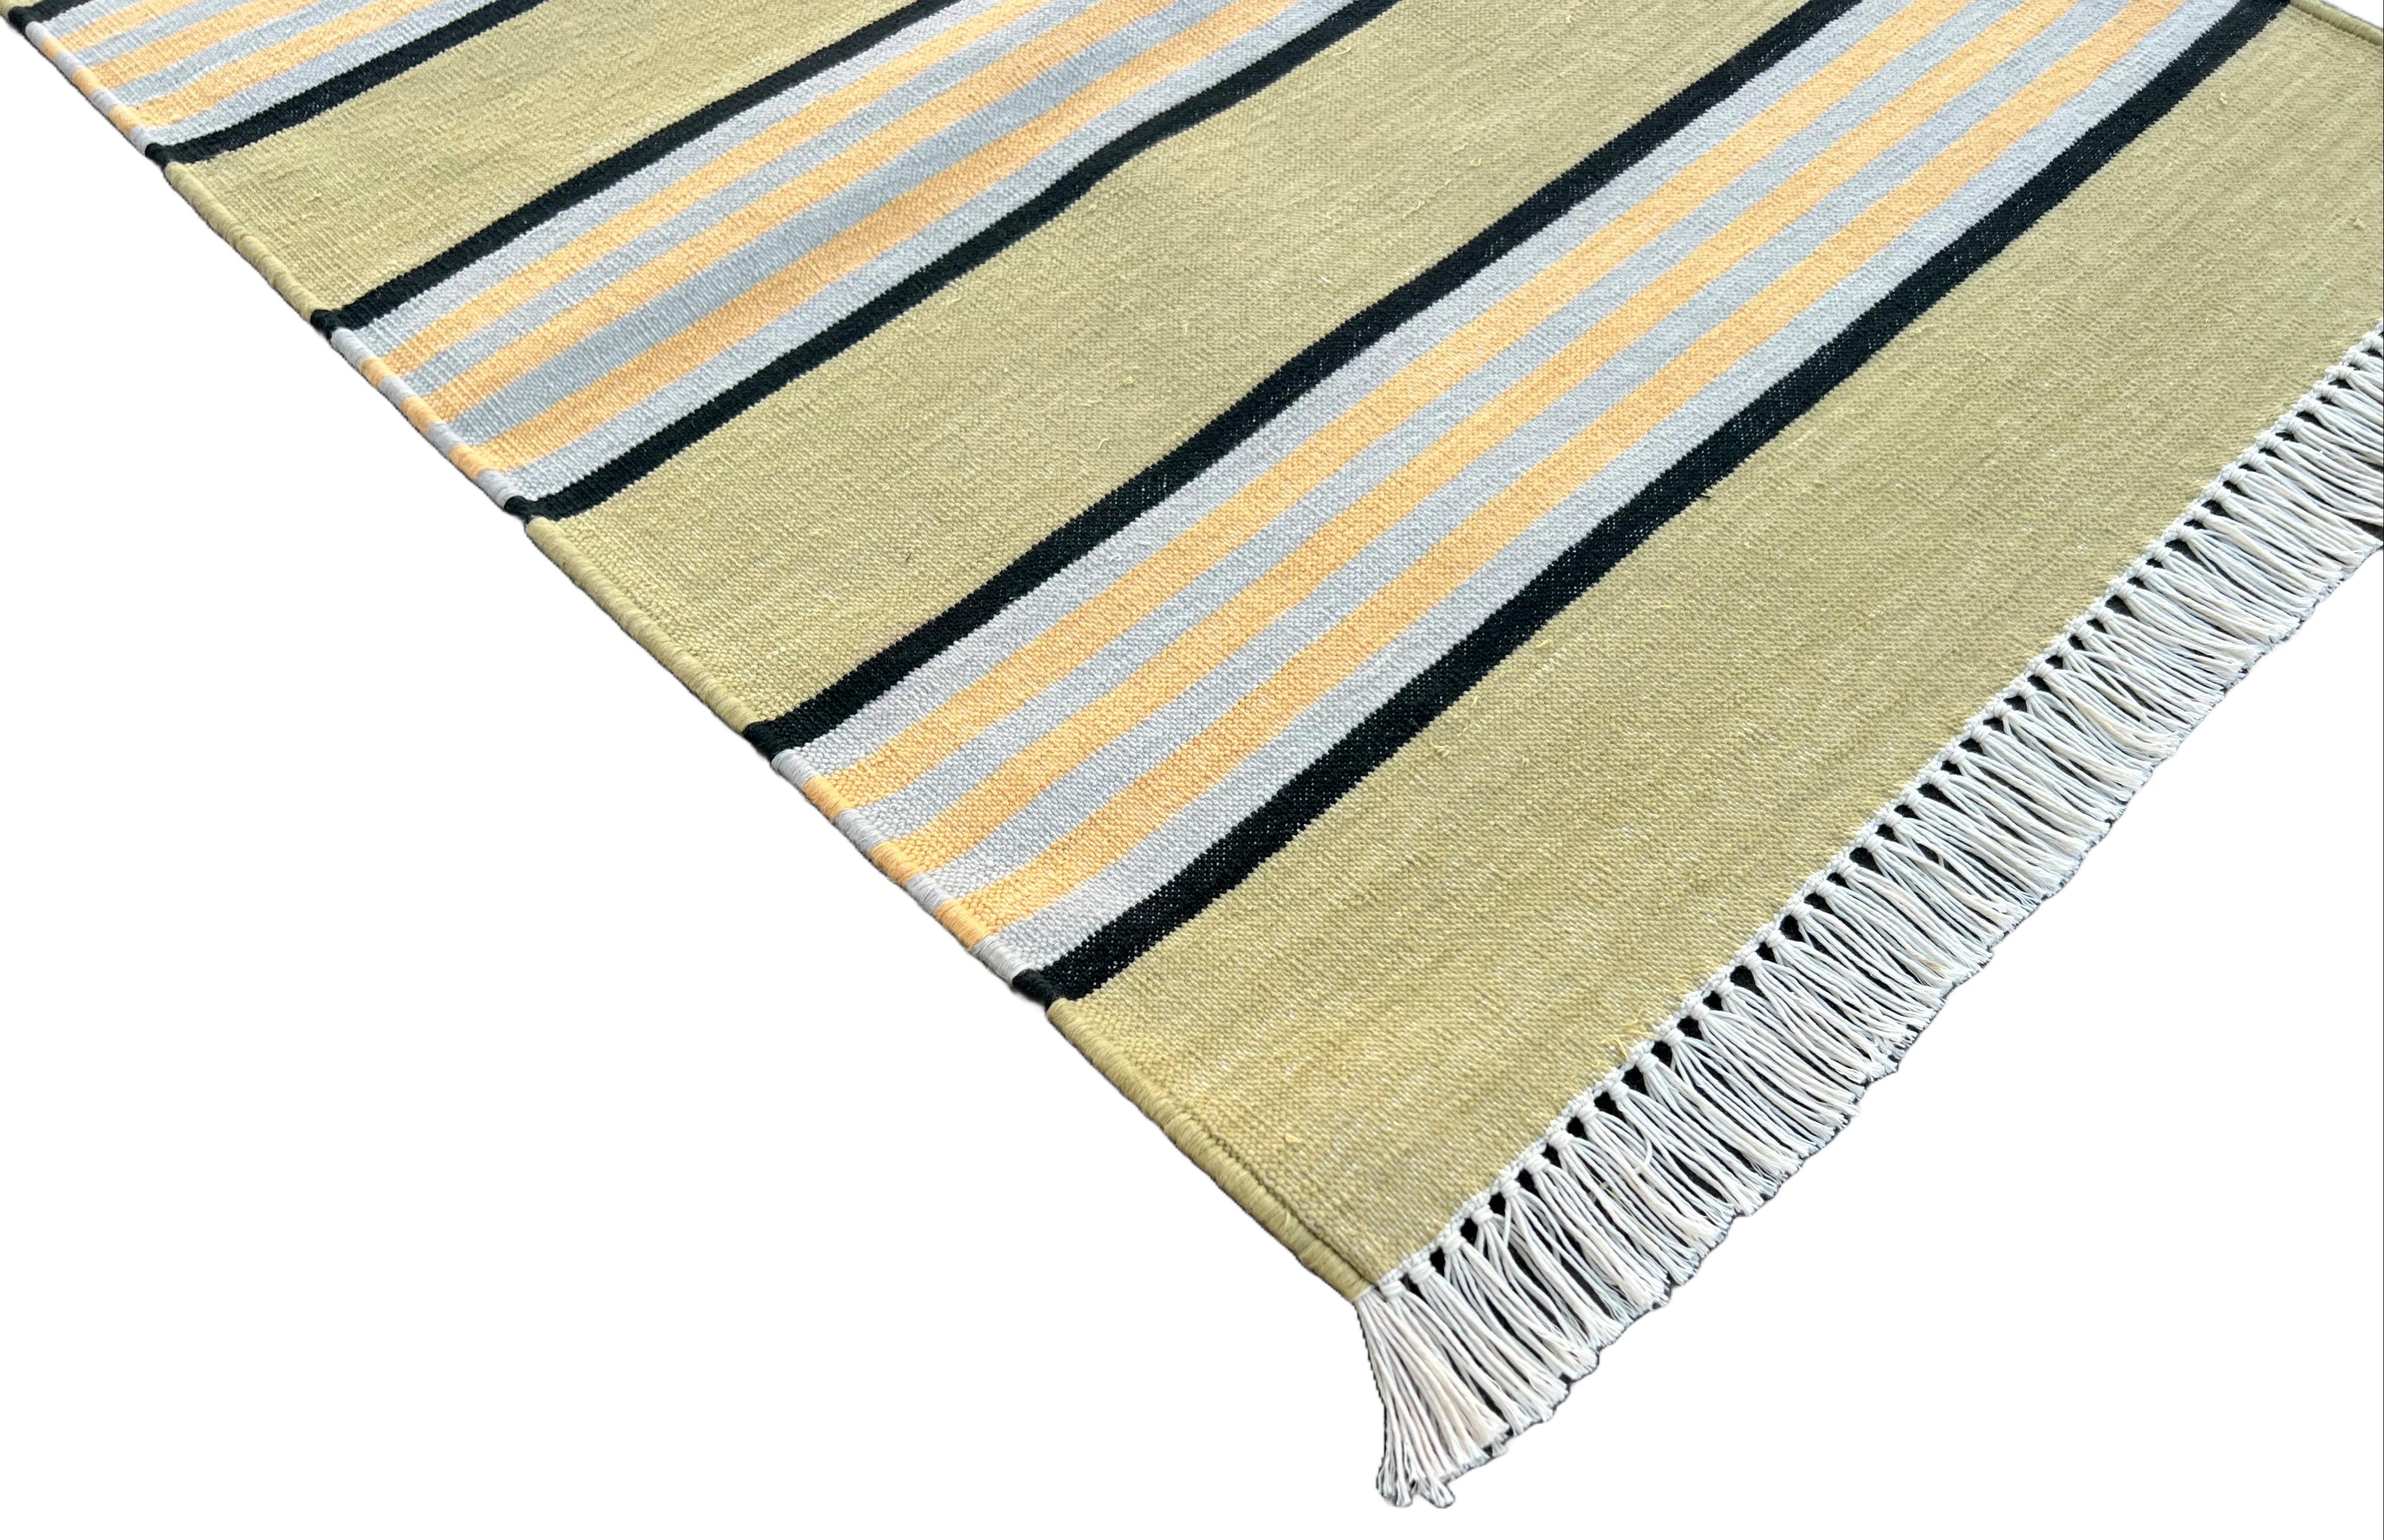 Cotton Natural Vegetable Dyed, Green, Yellow And Black Striped Indian Dhurrie Runner-2x10 feet (60x300cm)
These special flat-weave dhurries are hand-woven with 15 ply 100% cotton yarn. Due to the special manufacturing techniques used to create our